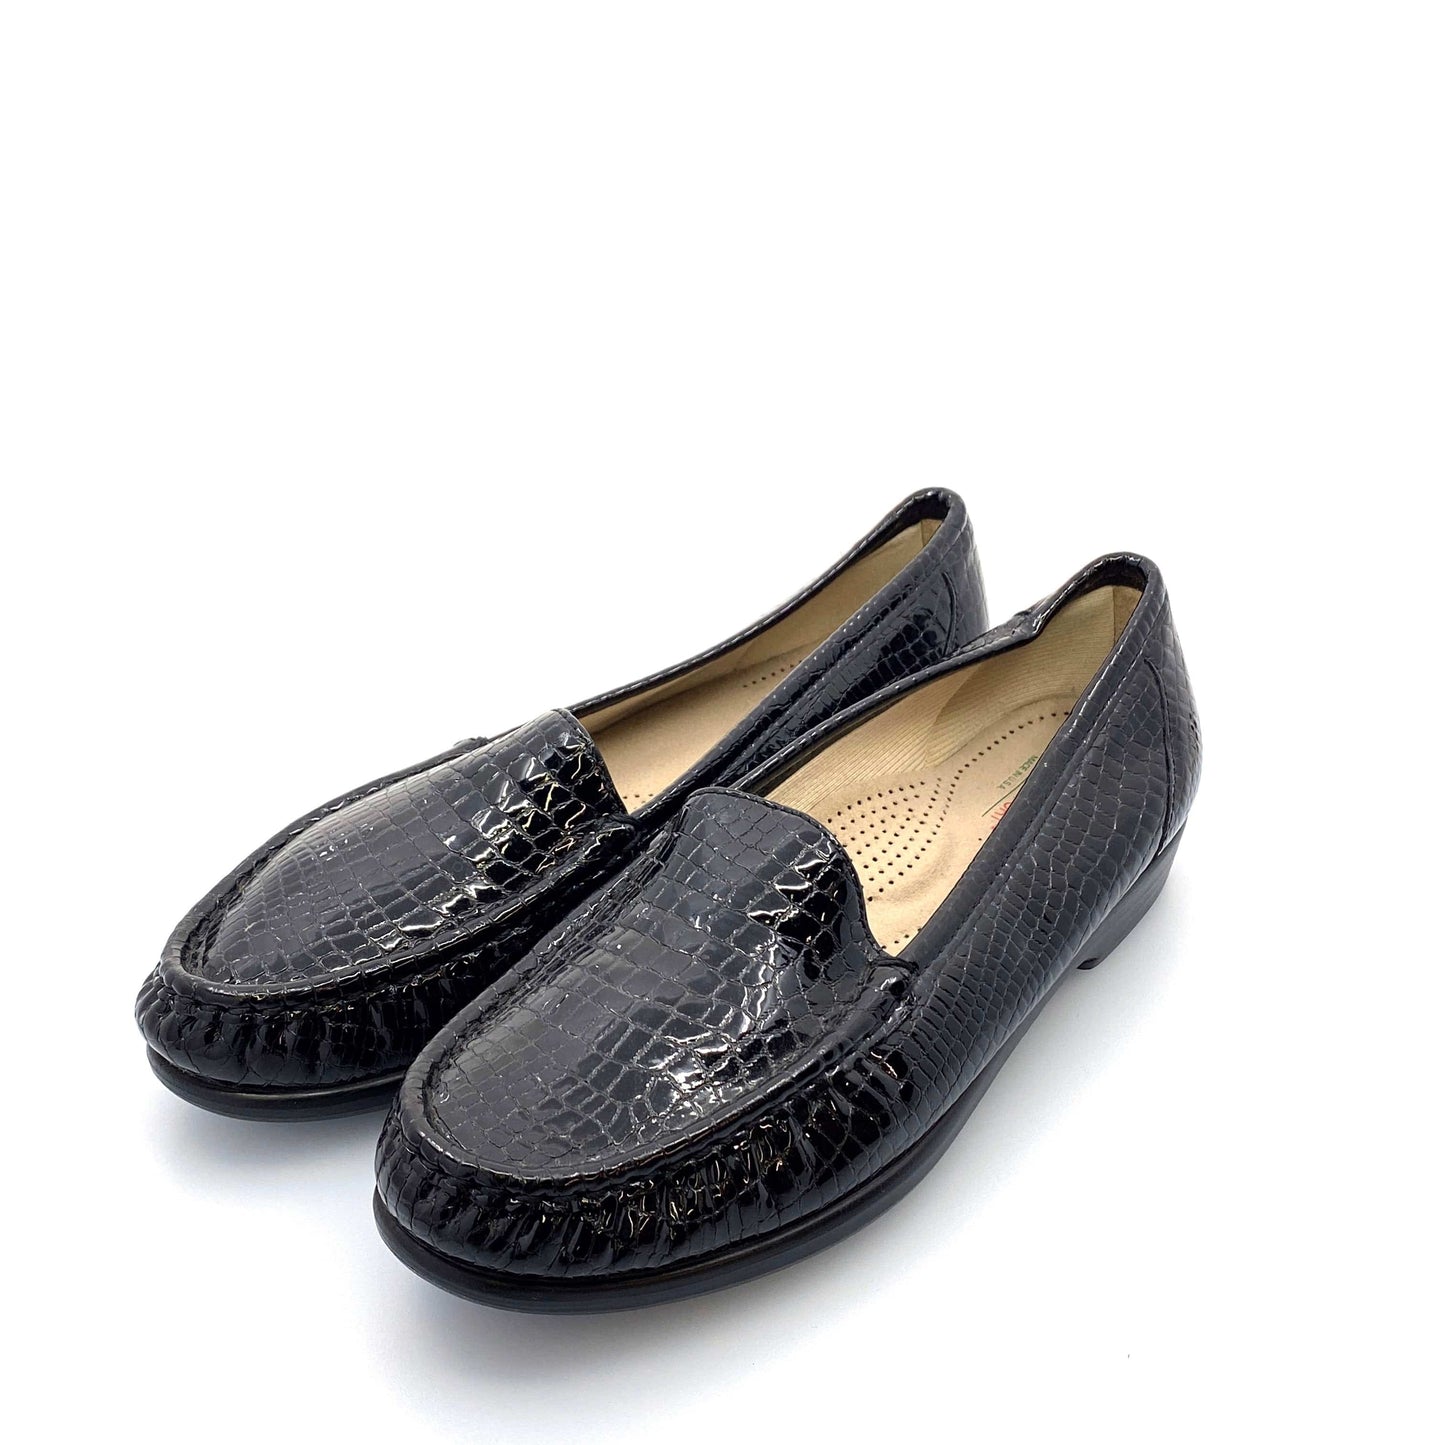 SAS Womens Size 9½N Black Alligator Leather Loafers Shoes Tripad Comfort Foot